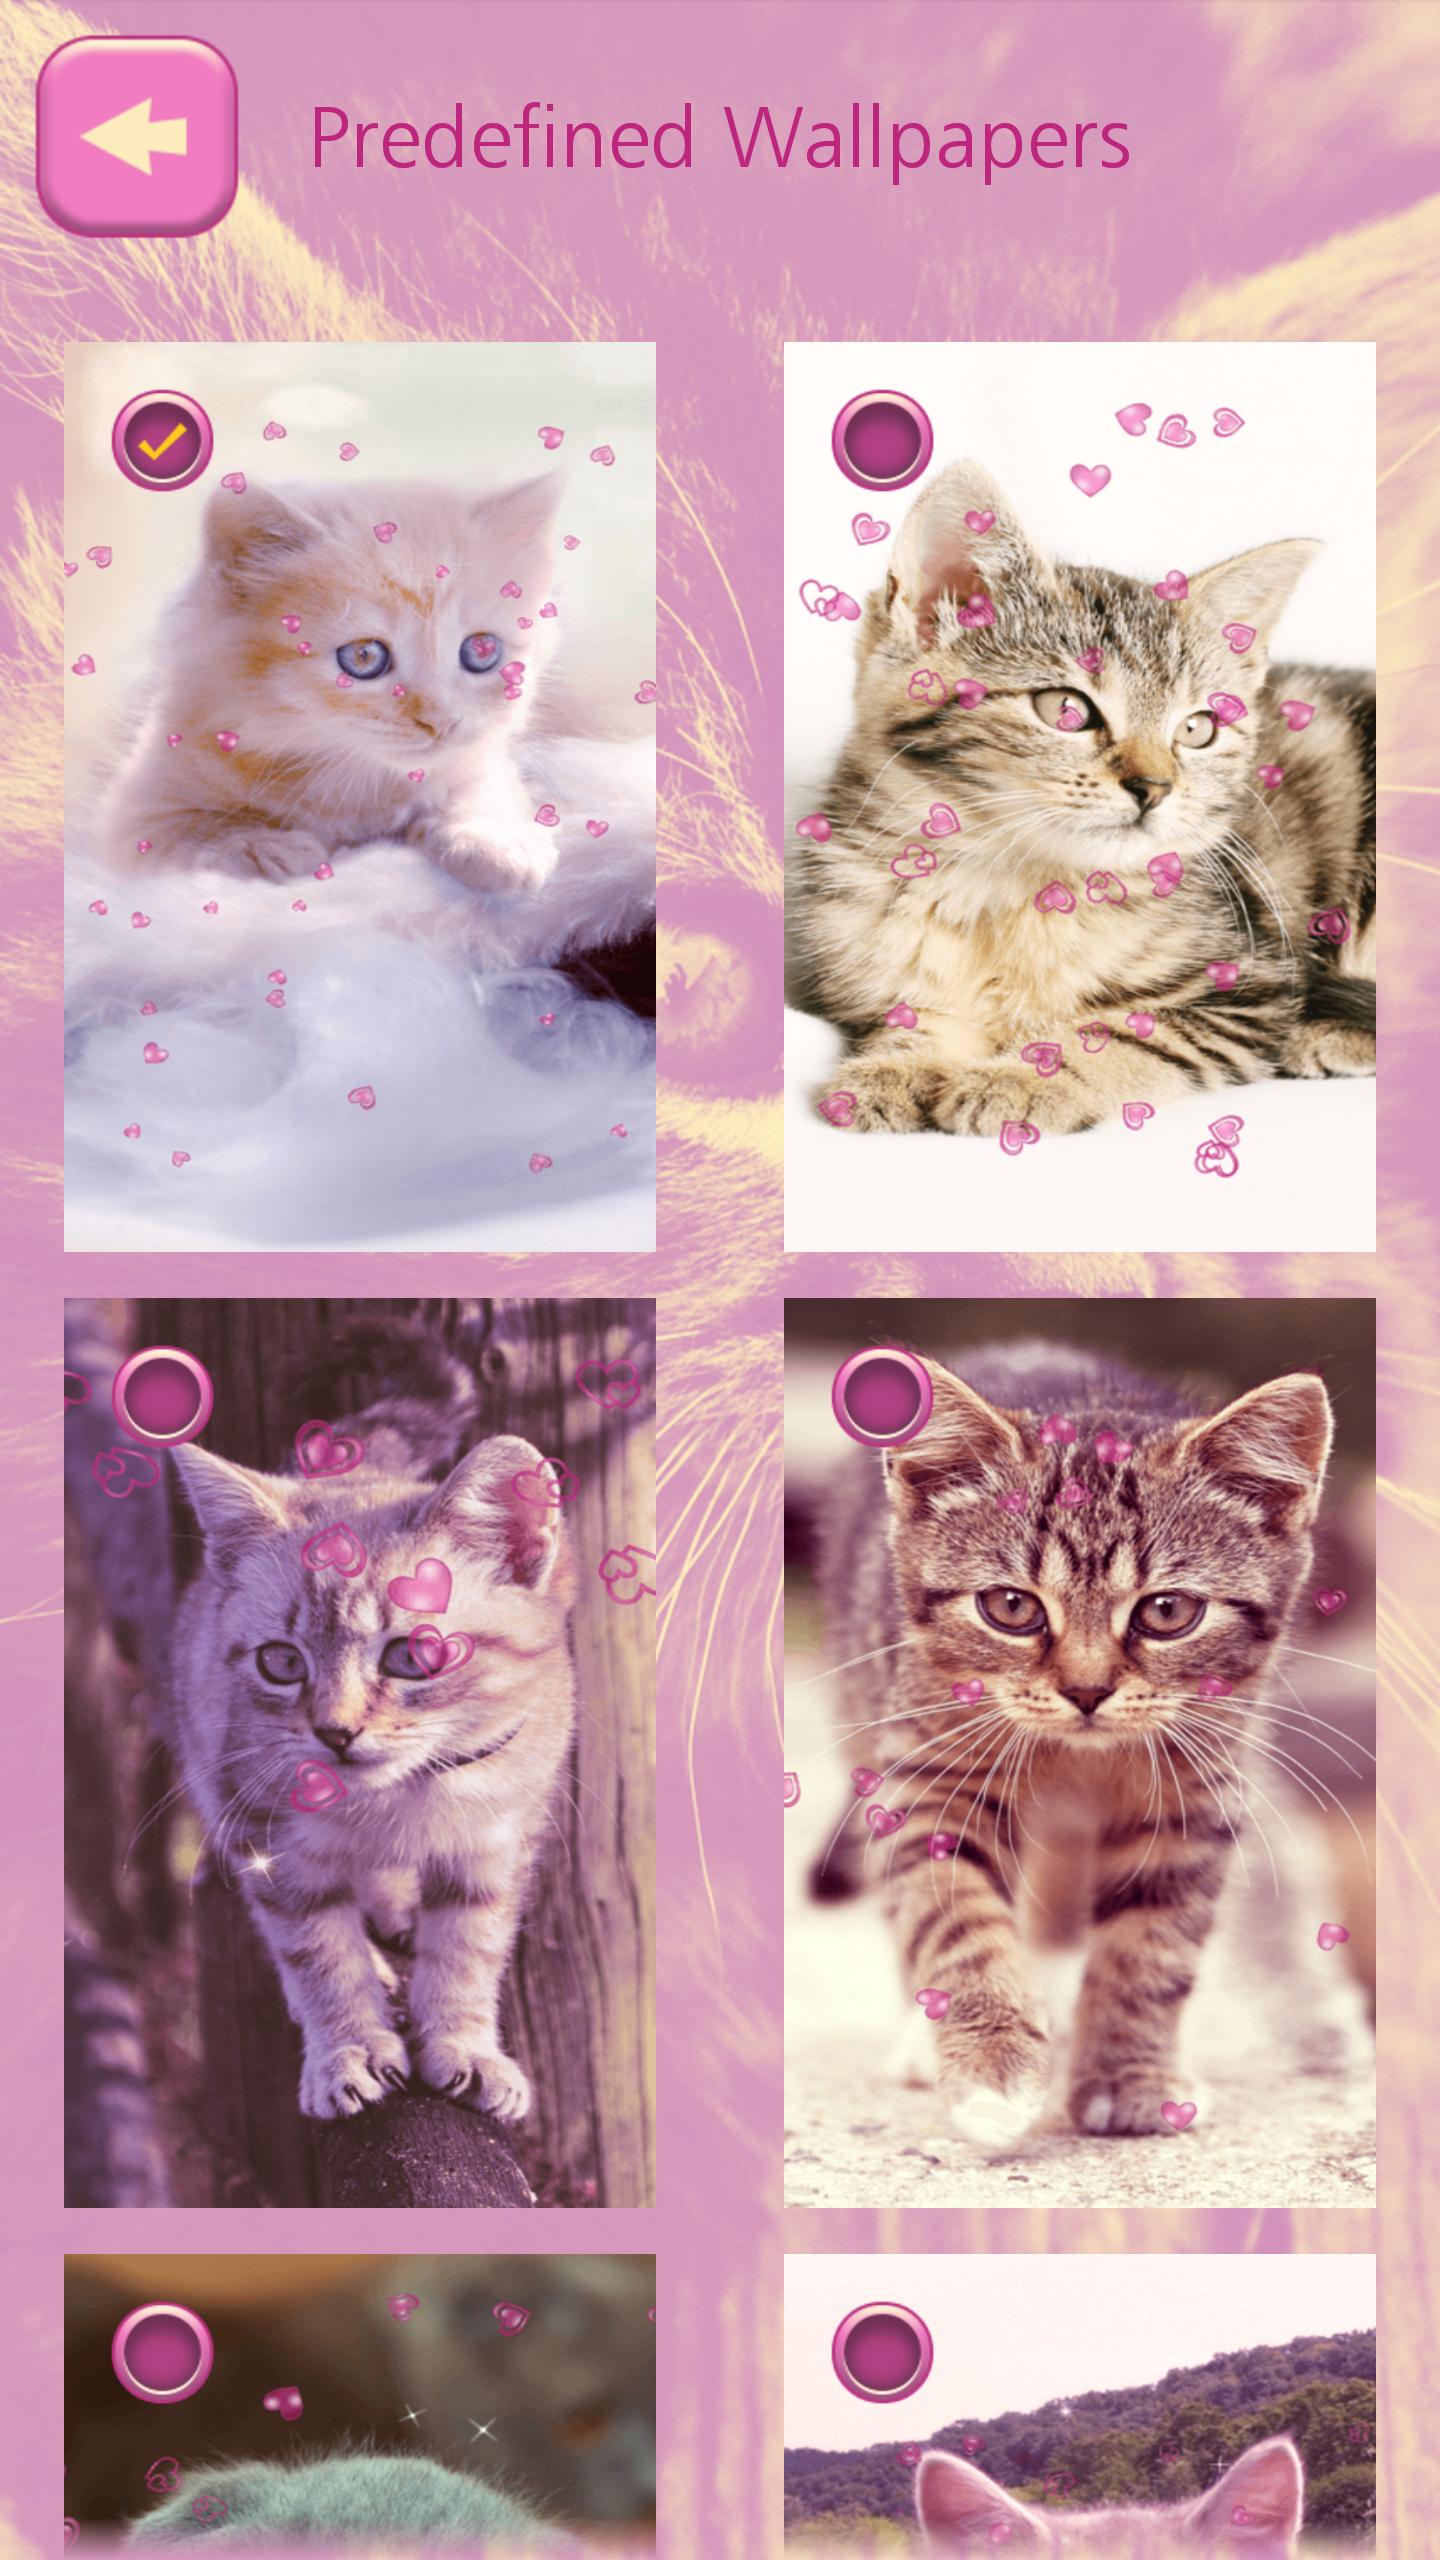 Anak Kucing Lucu Wallpaper For Android APK Download